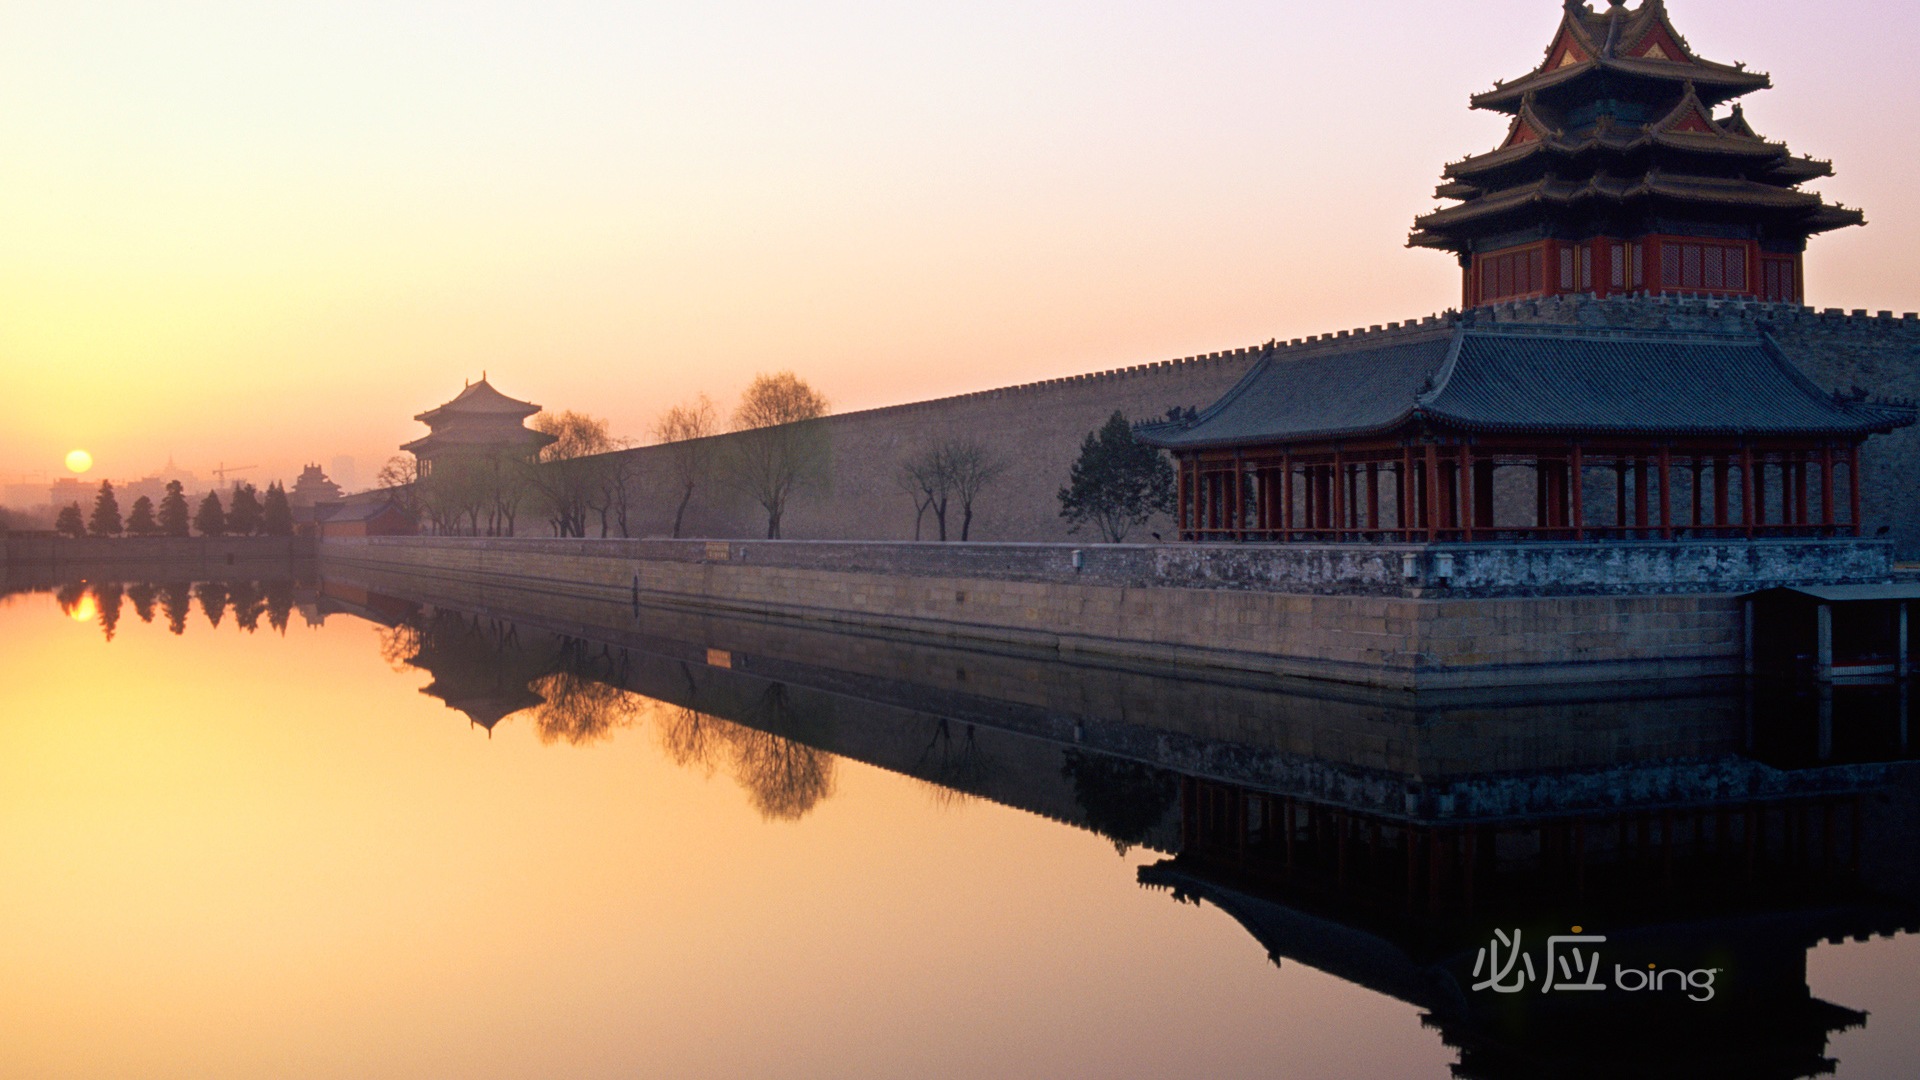 Bing selection best HD wallpapers: China theme wallpaper (2) #5 - 1920x1080